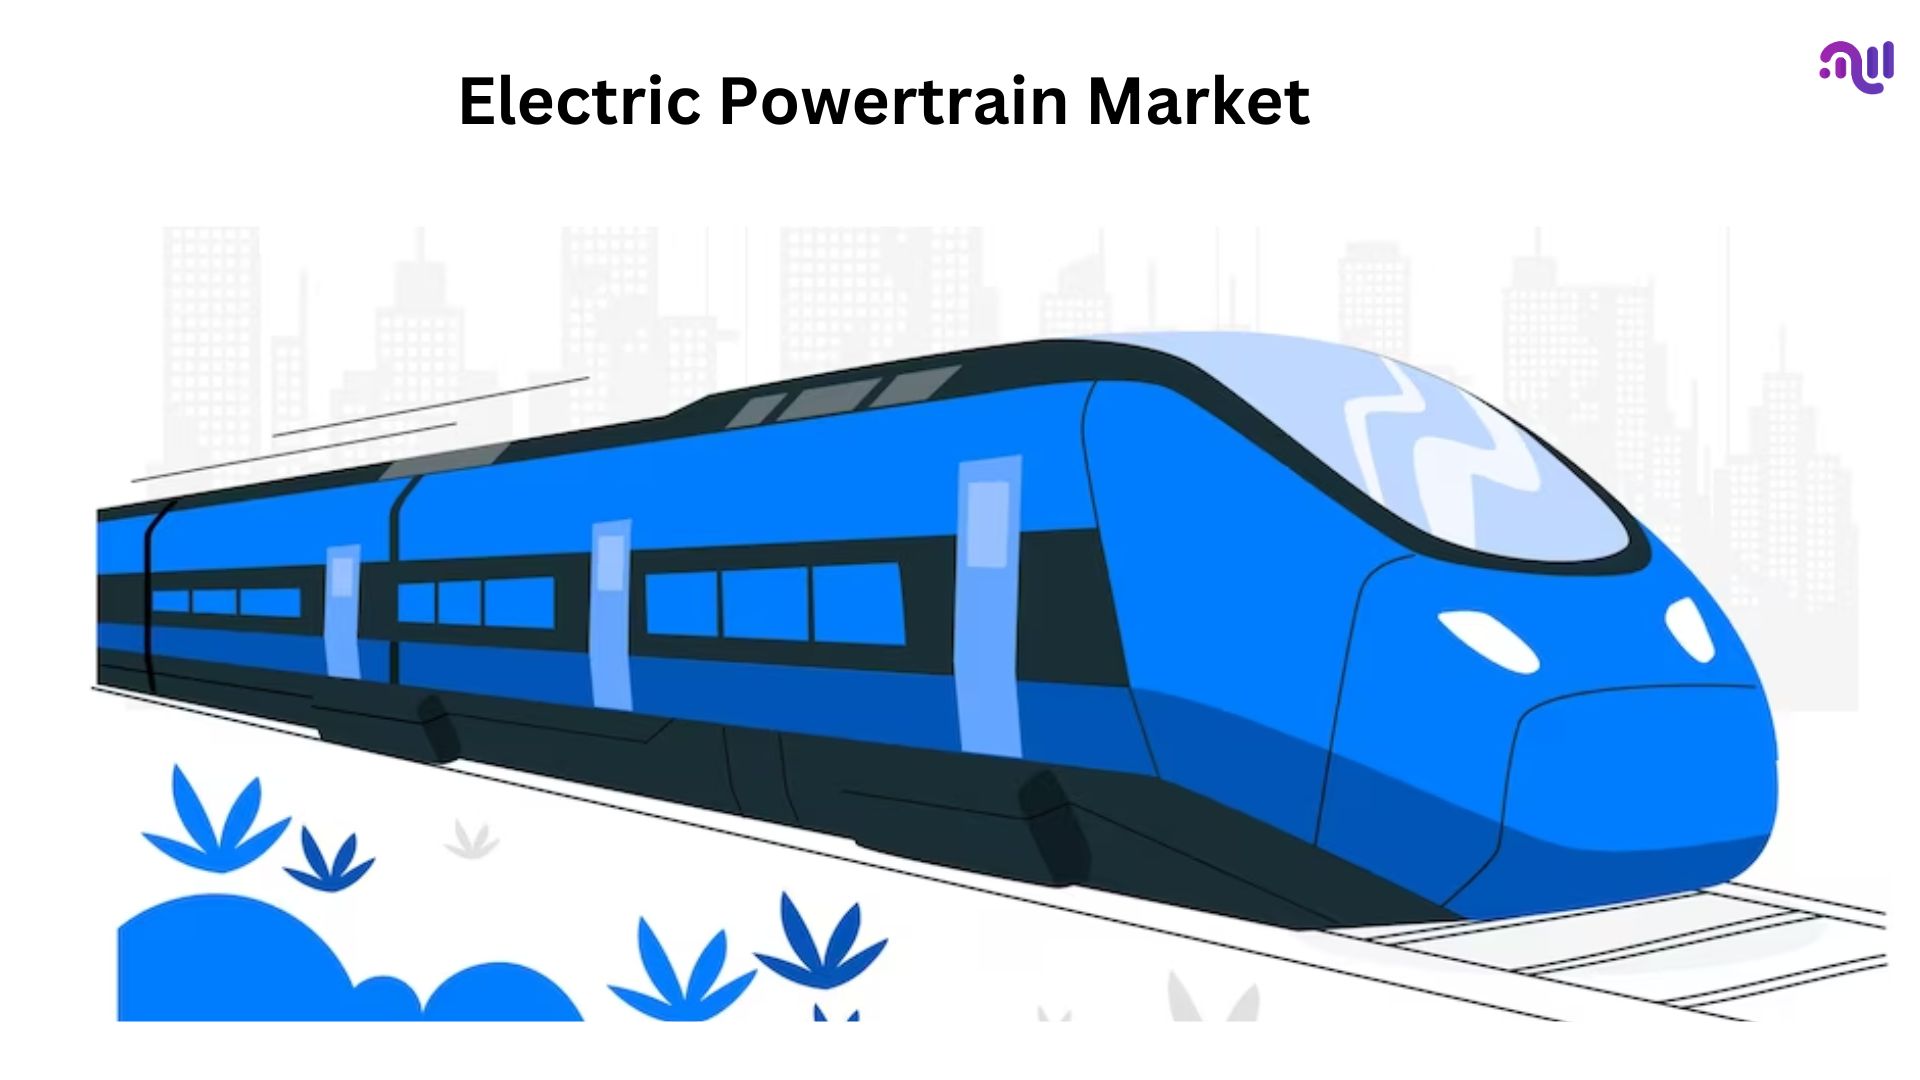 Electric Powertrain Market With 26% CAGR, Market Predicted To Generate USD 1,015 Bn In Revenues By 2032